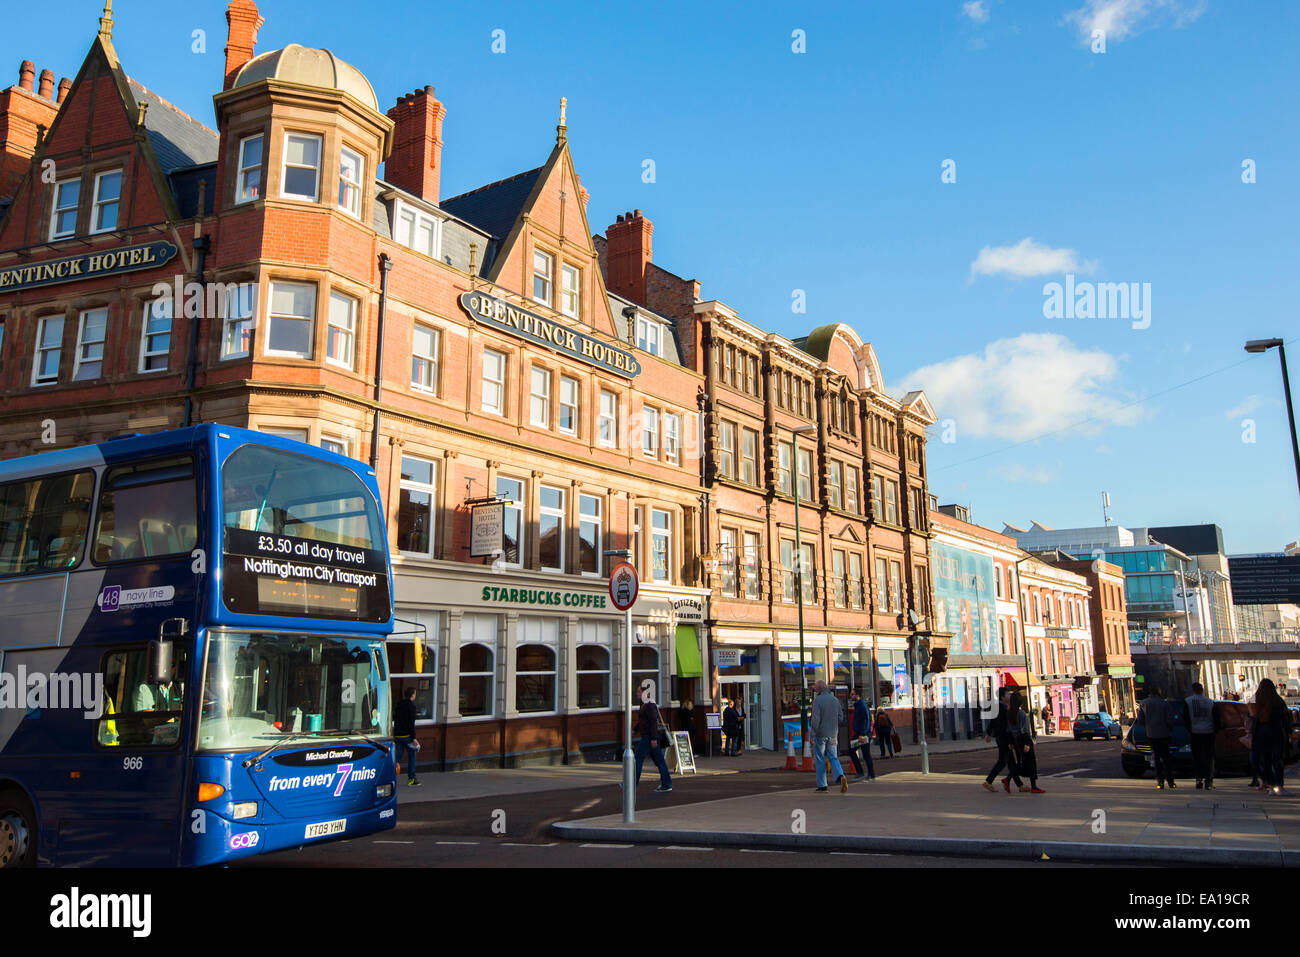 A bus crossing Station Street in Nottingham City, England UK Stock Photo